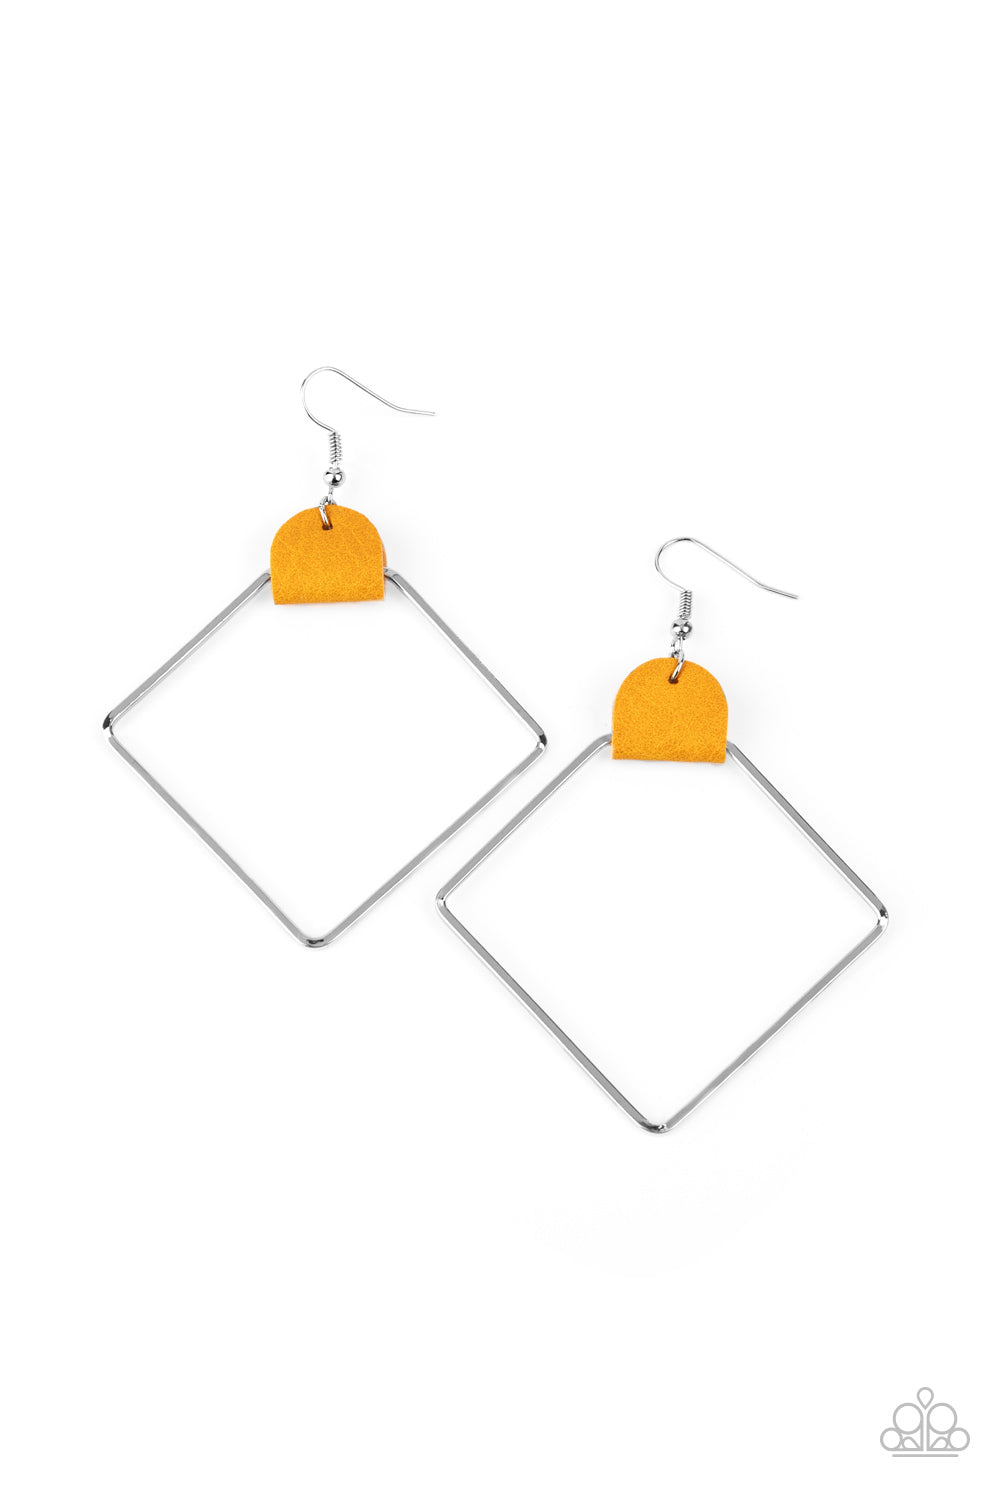 &lt;P&gt;An airy geometric silver hoop is pinched between a dainty piece of golden yellow leather, creating an edgy lure. Earring attaches to a standard fishhook fitting.&lt;/P&gt;  

&lt;P&gt; &lt;I&gt;  Sold as one pair of earrings. &lt;/I&gt;  &lt;/P&gt;


&lt;img src=\&quot;https://d9b54x484lq62.cloudfront.net/paparazzi/shopping/images/517_tag150x115_1.png\&quot; alt=\&quot;New Kit\&quot; align=\&quot;middle\&quot; height=\&quot;50\&quot; width=\&quot;50\&quot;/&gt;